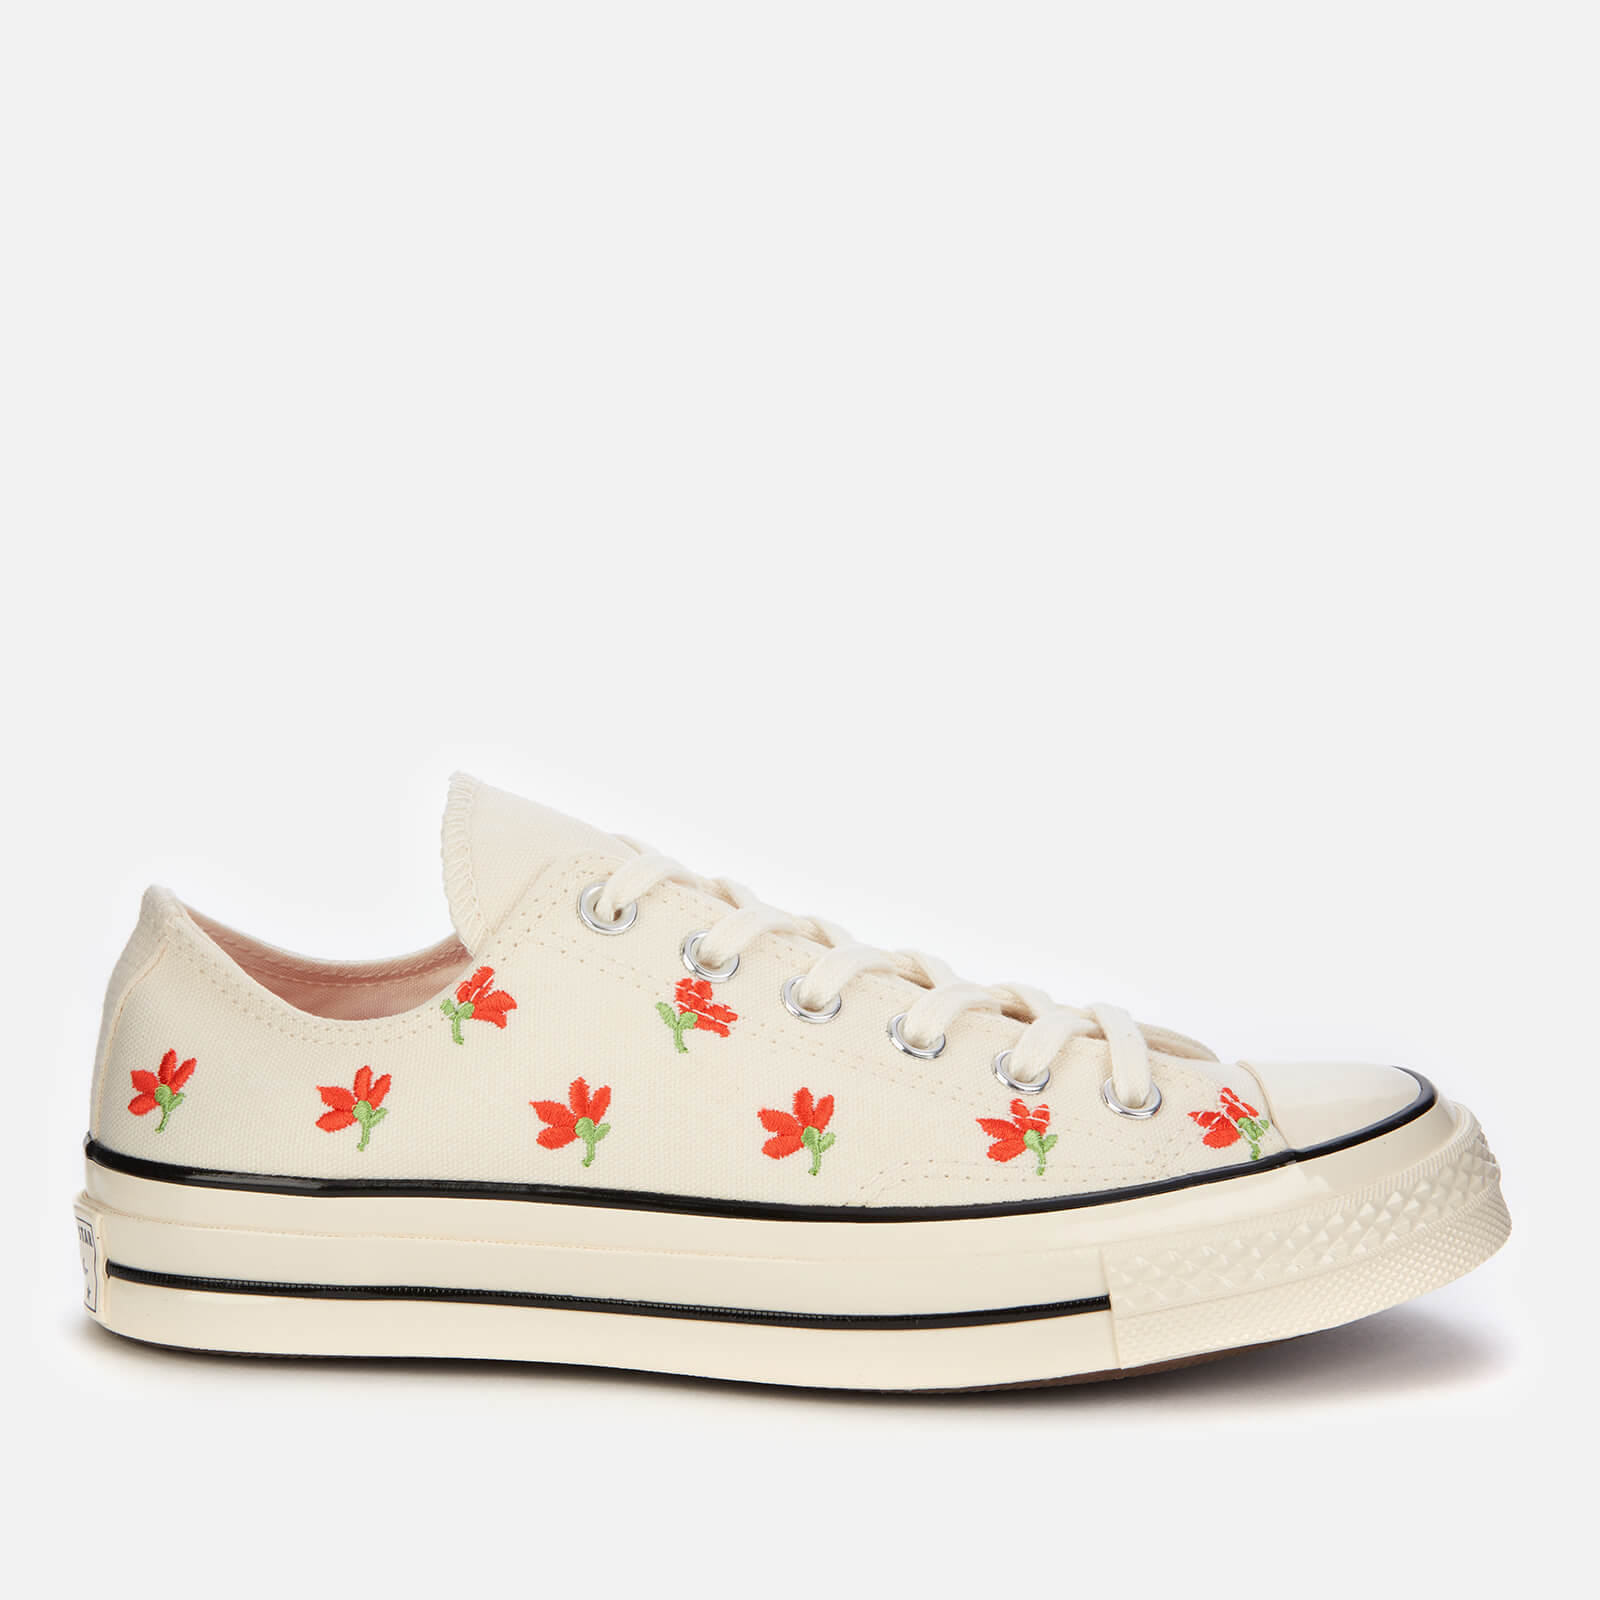 Converse Women's Chuck 70 Embroidered Garden Party Ox Trainers - Egret/Bright Poppy/Black - UK 3